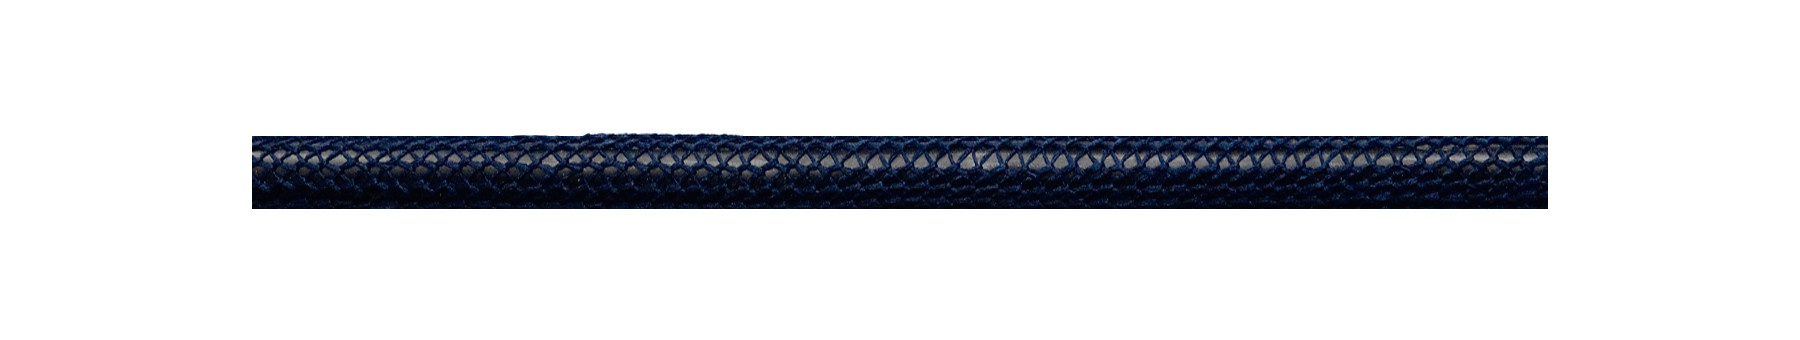 Textile Cable Dark Blue Netlike Textile Covering